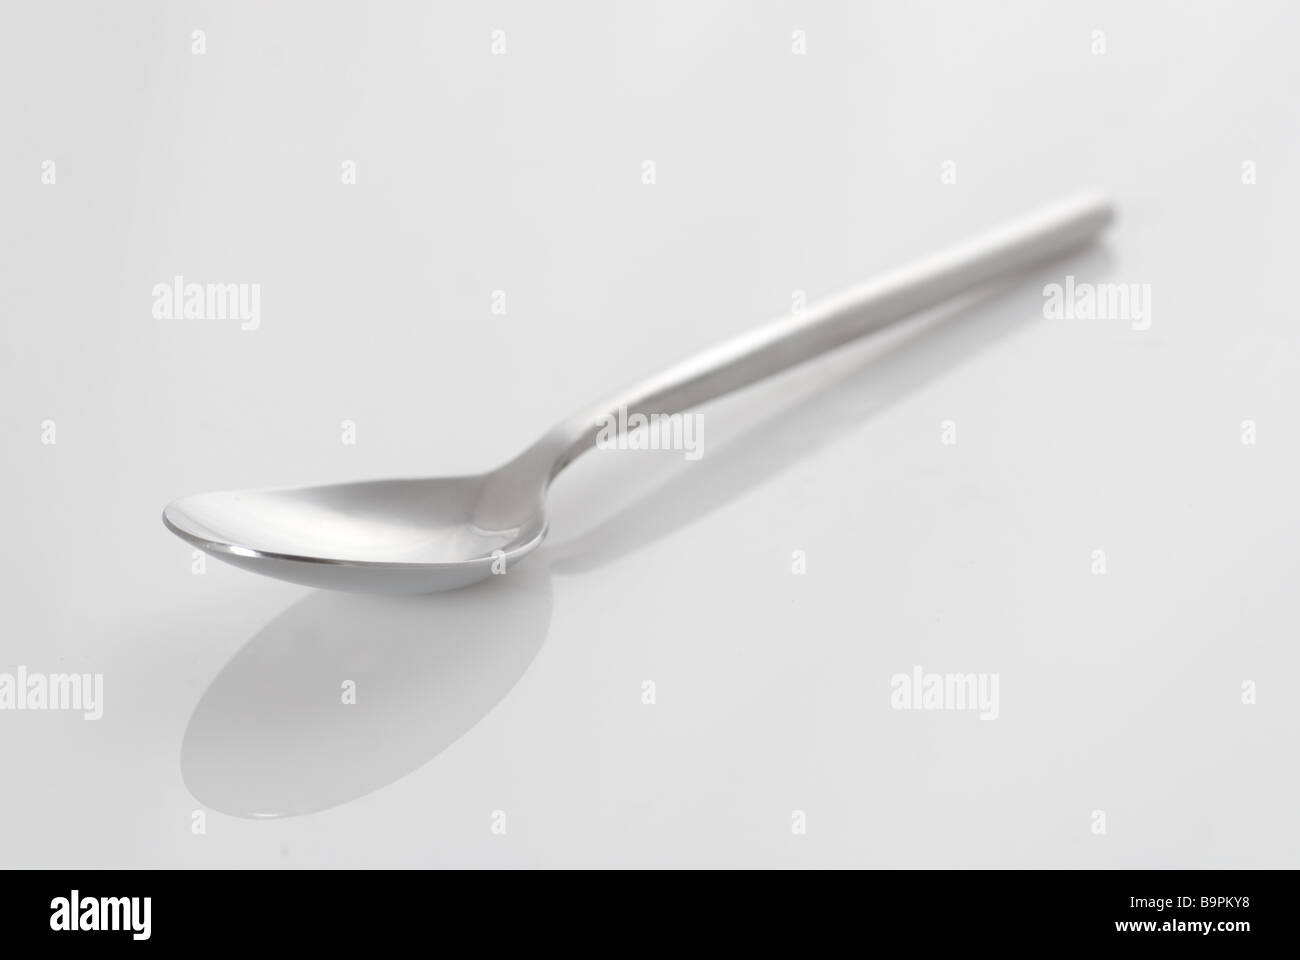 Eating spoon on a white background Stock Photo